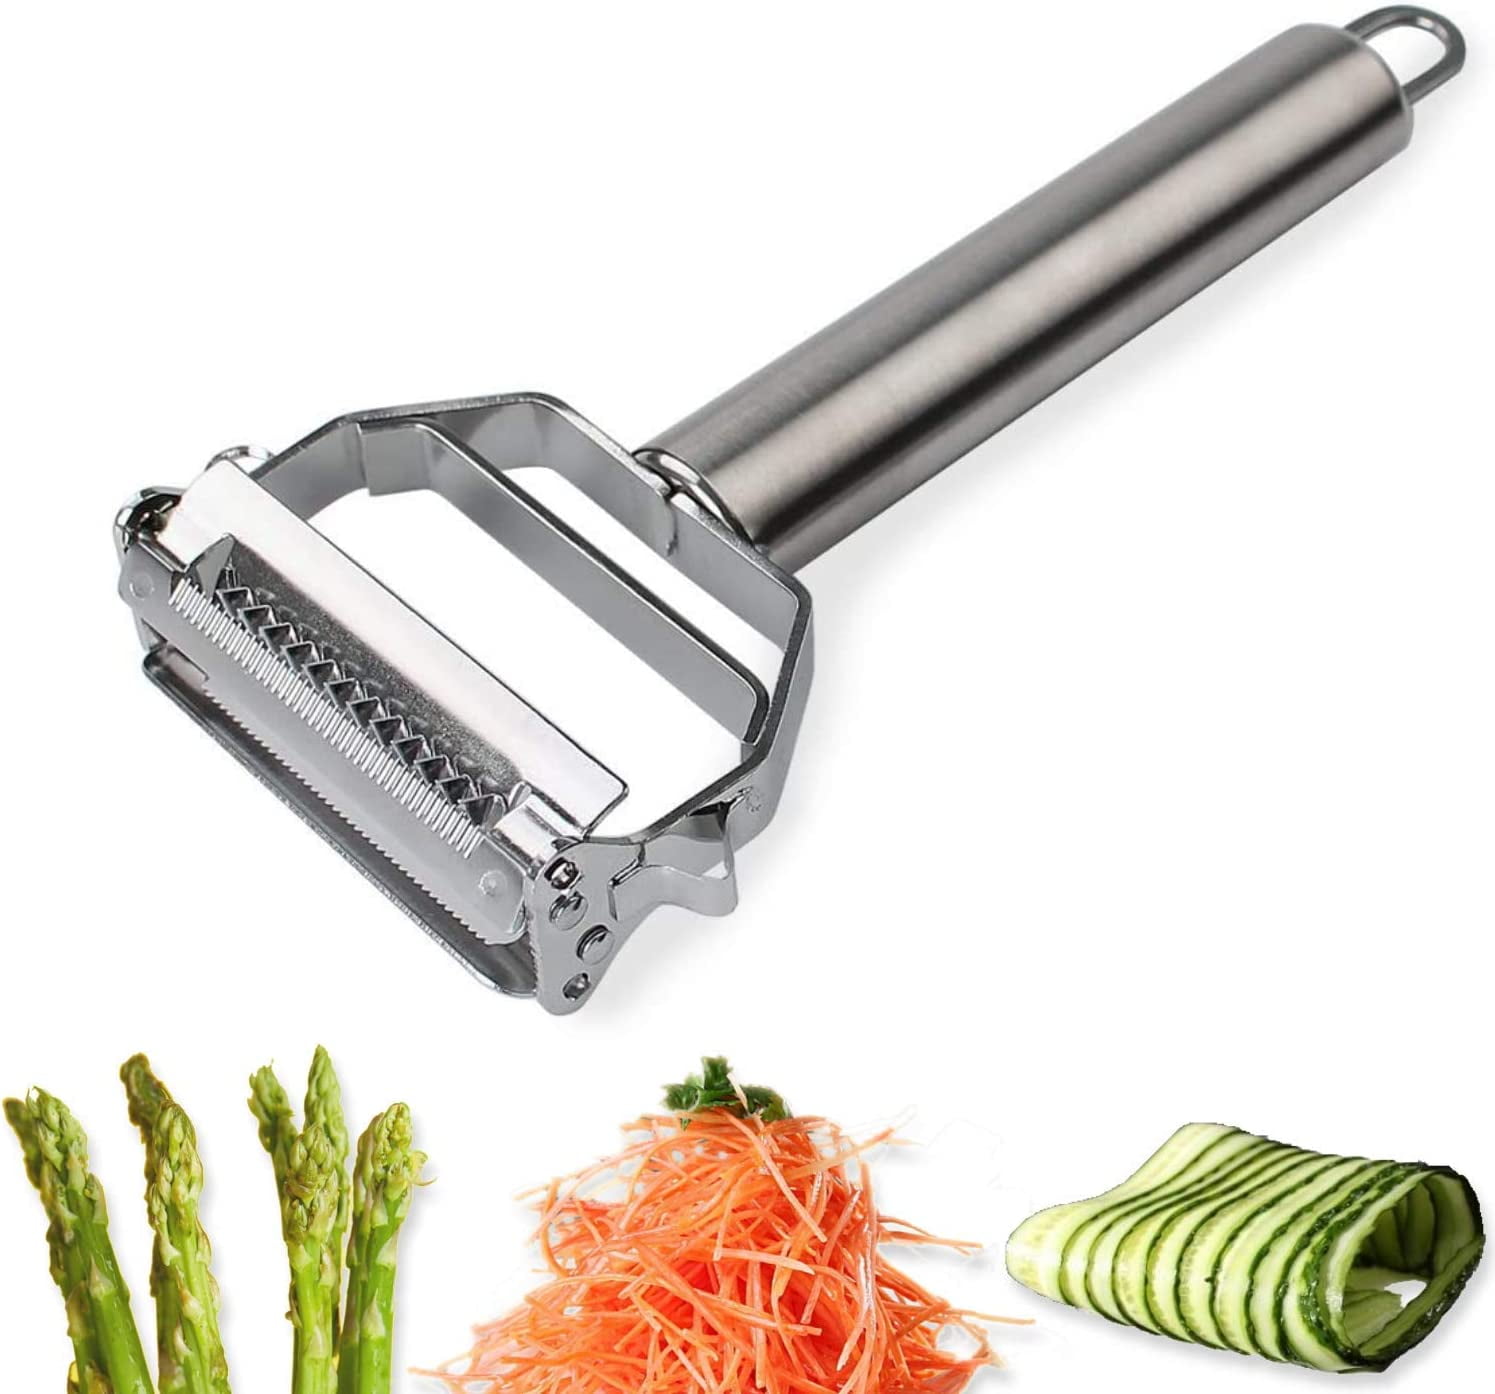  Best Utensils Multifunctional Julienne Tomato Peeler With  Serrated Blades 2 in 1 Stainless Steel Orange Peeler Potato Carrot  Vegetable Grater Kitchen Accessories, With Cleaning Brush : Home & Kitchen